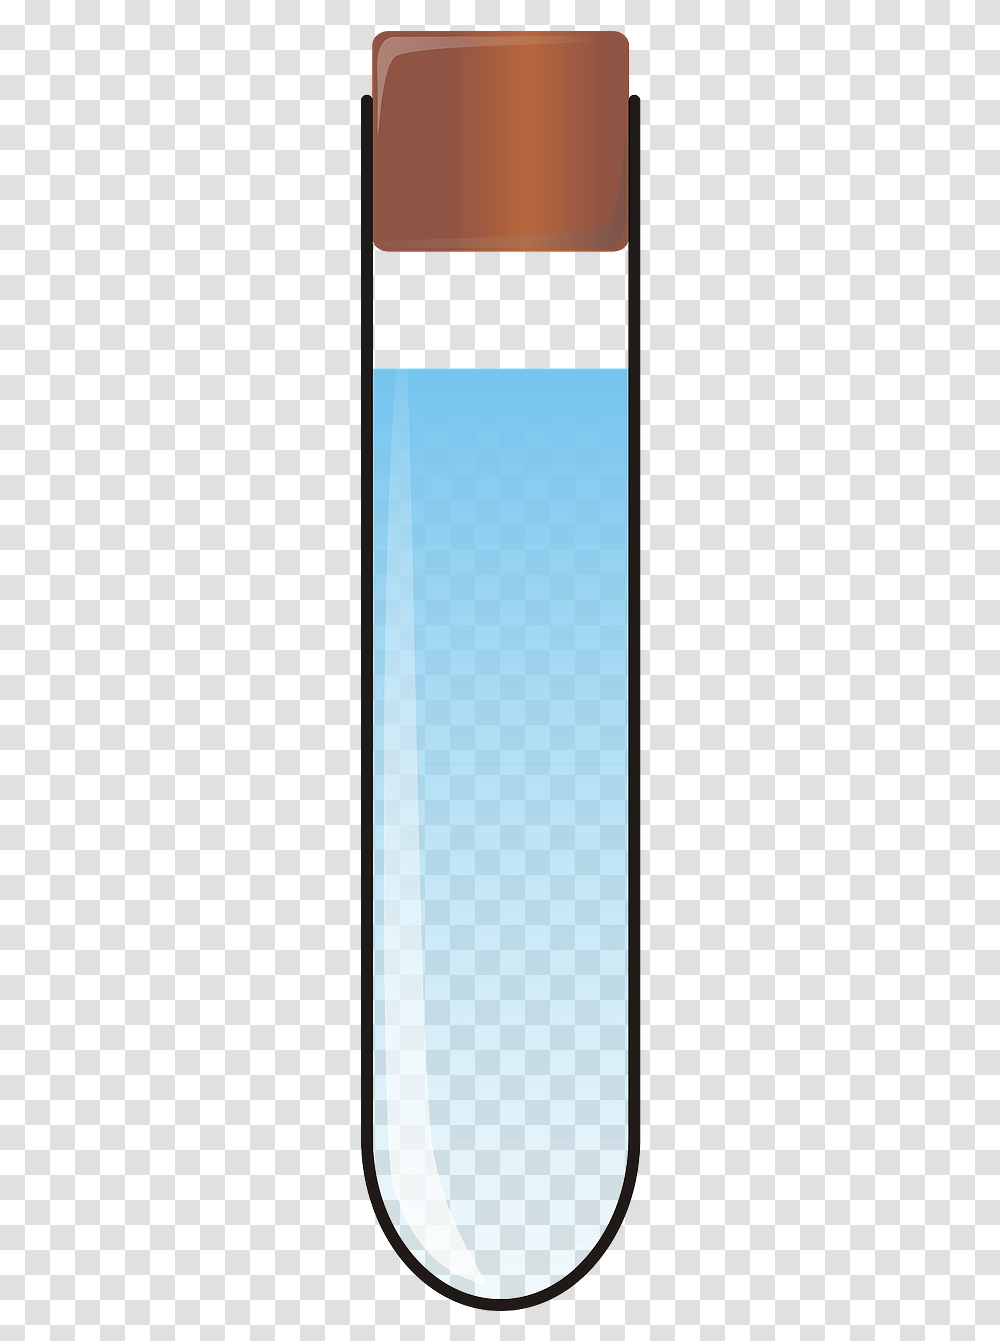 Lab Tube, Phone, Electronics, Mobile Phone, Cell Phone Transparent Png